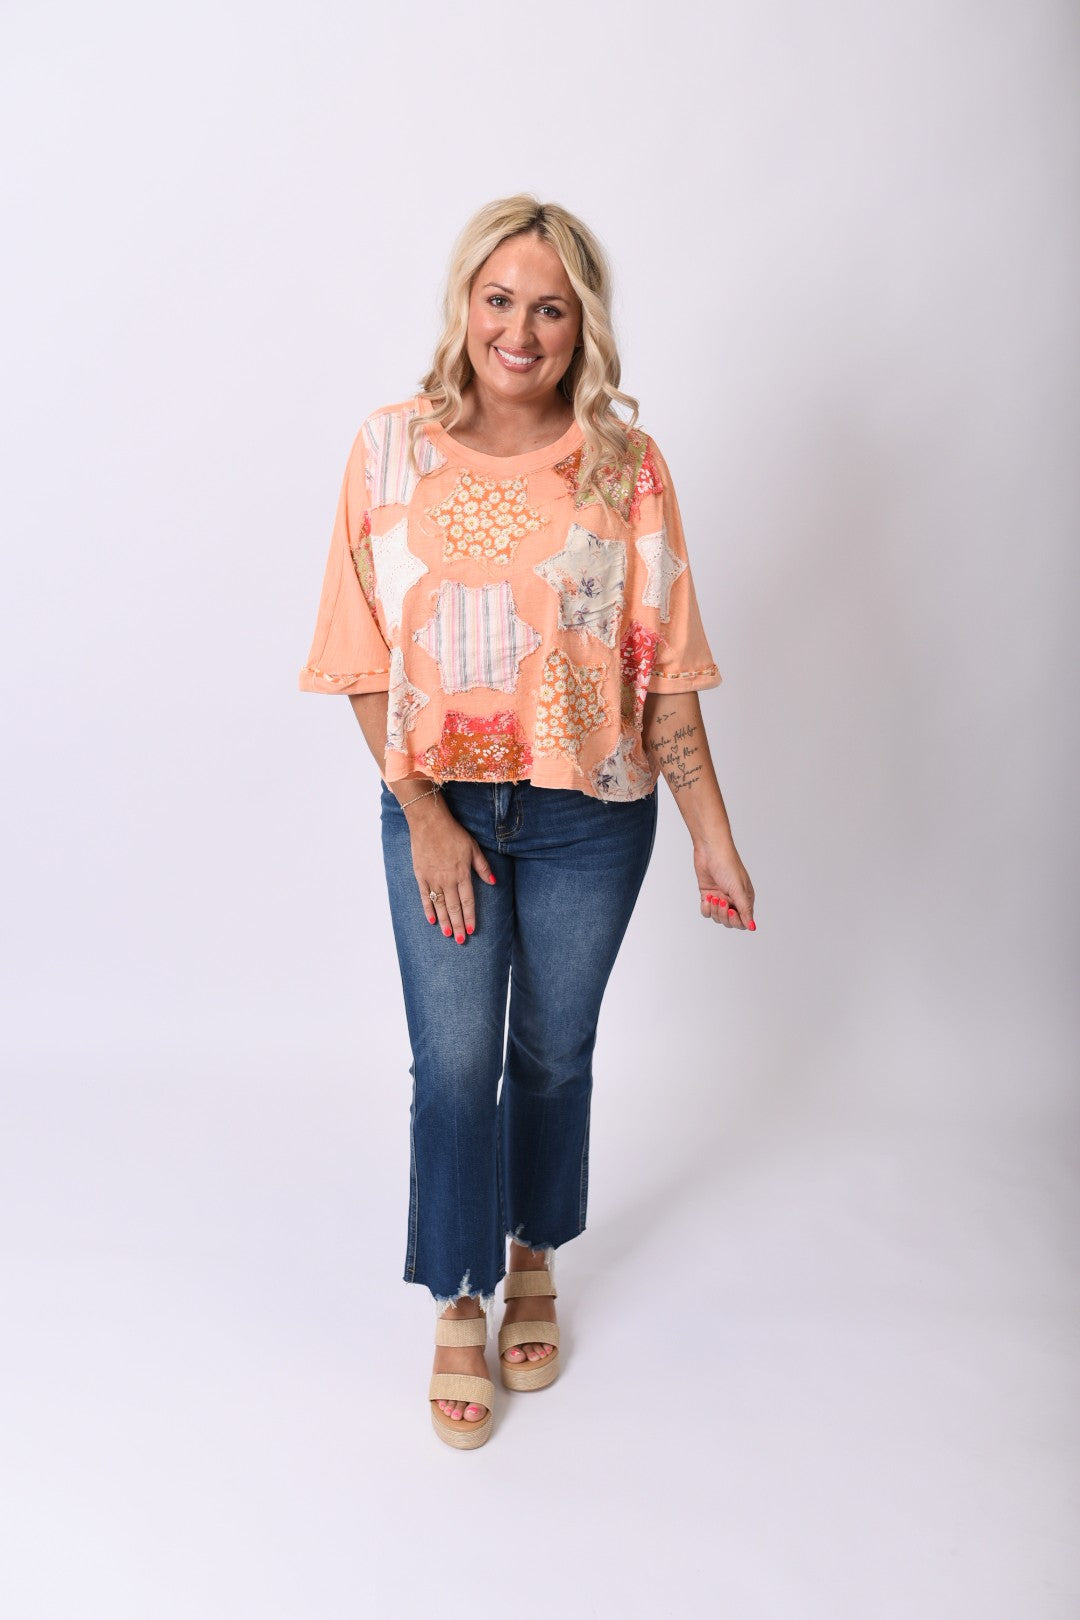 Sunny Day Stars Patchwork Top